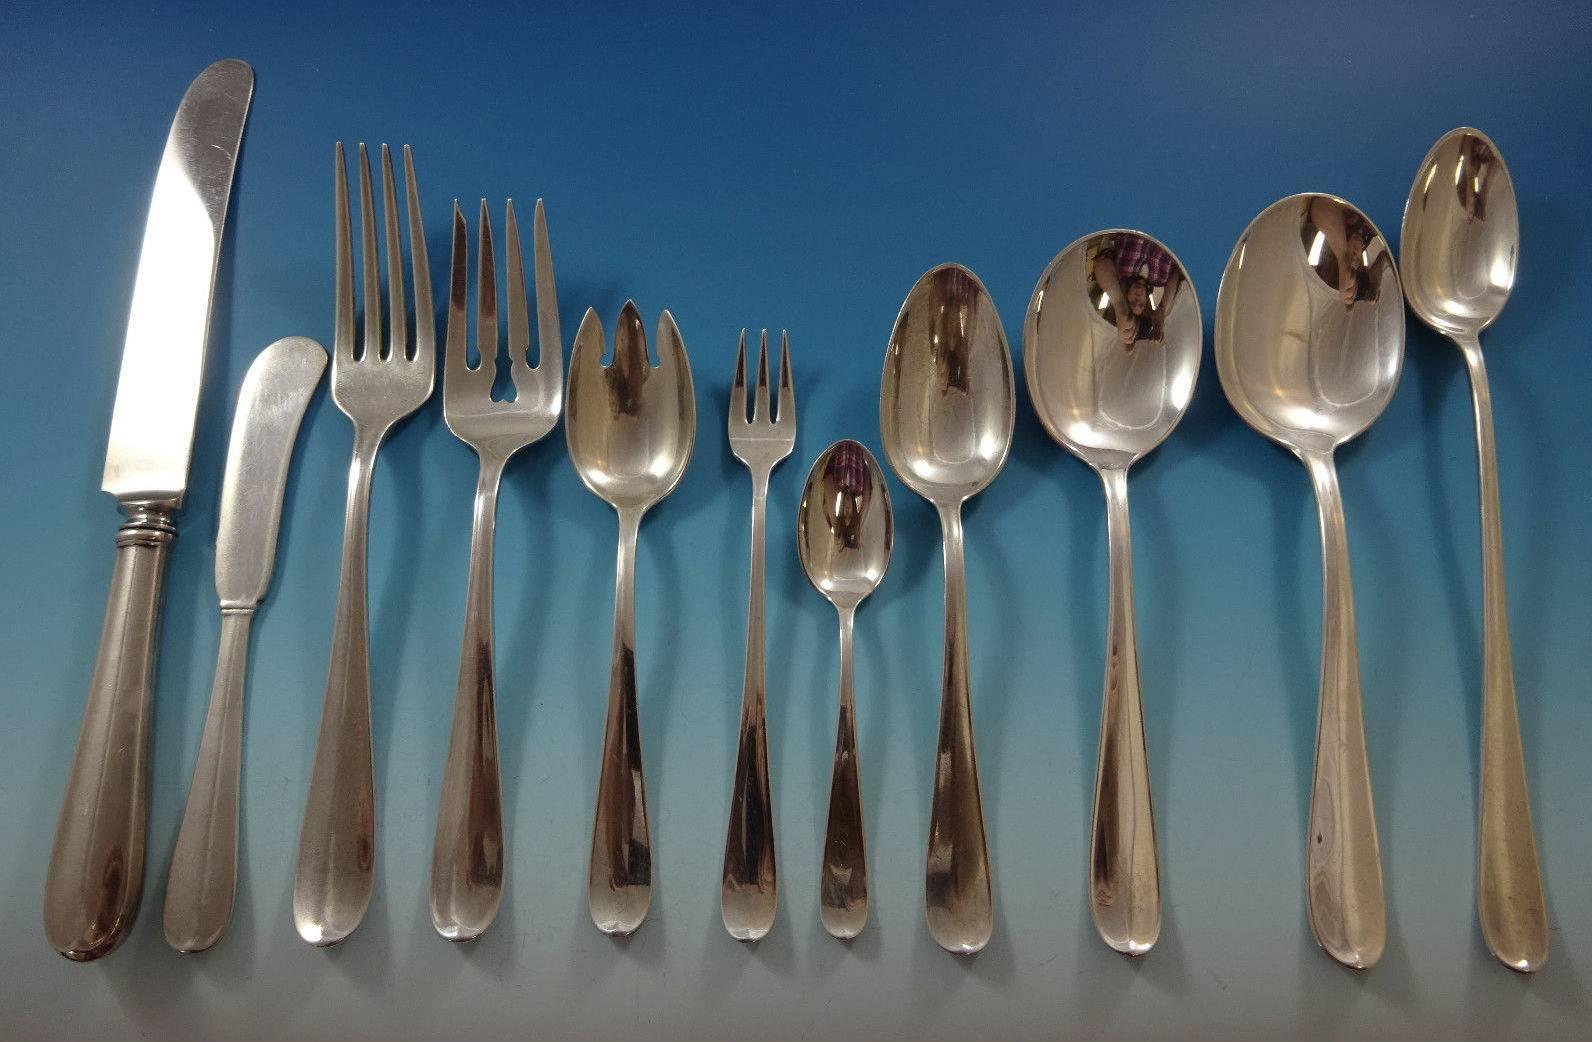 Rare large Dolly Madison by Gorham sterling silver flatware set for eight, 93 pieces. This set includes: 

Eight knives, 8 3/4